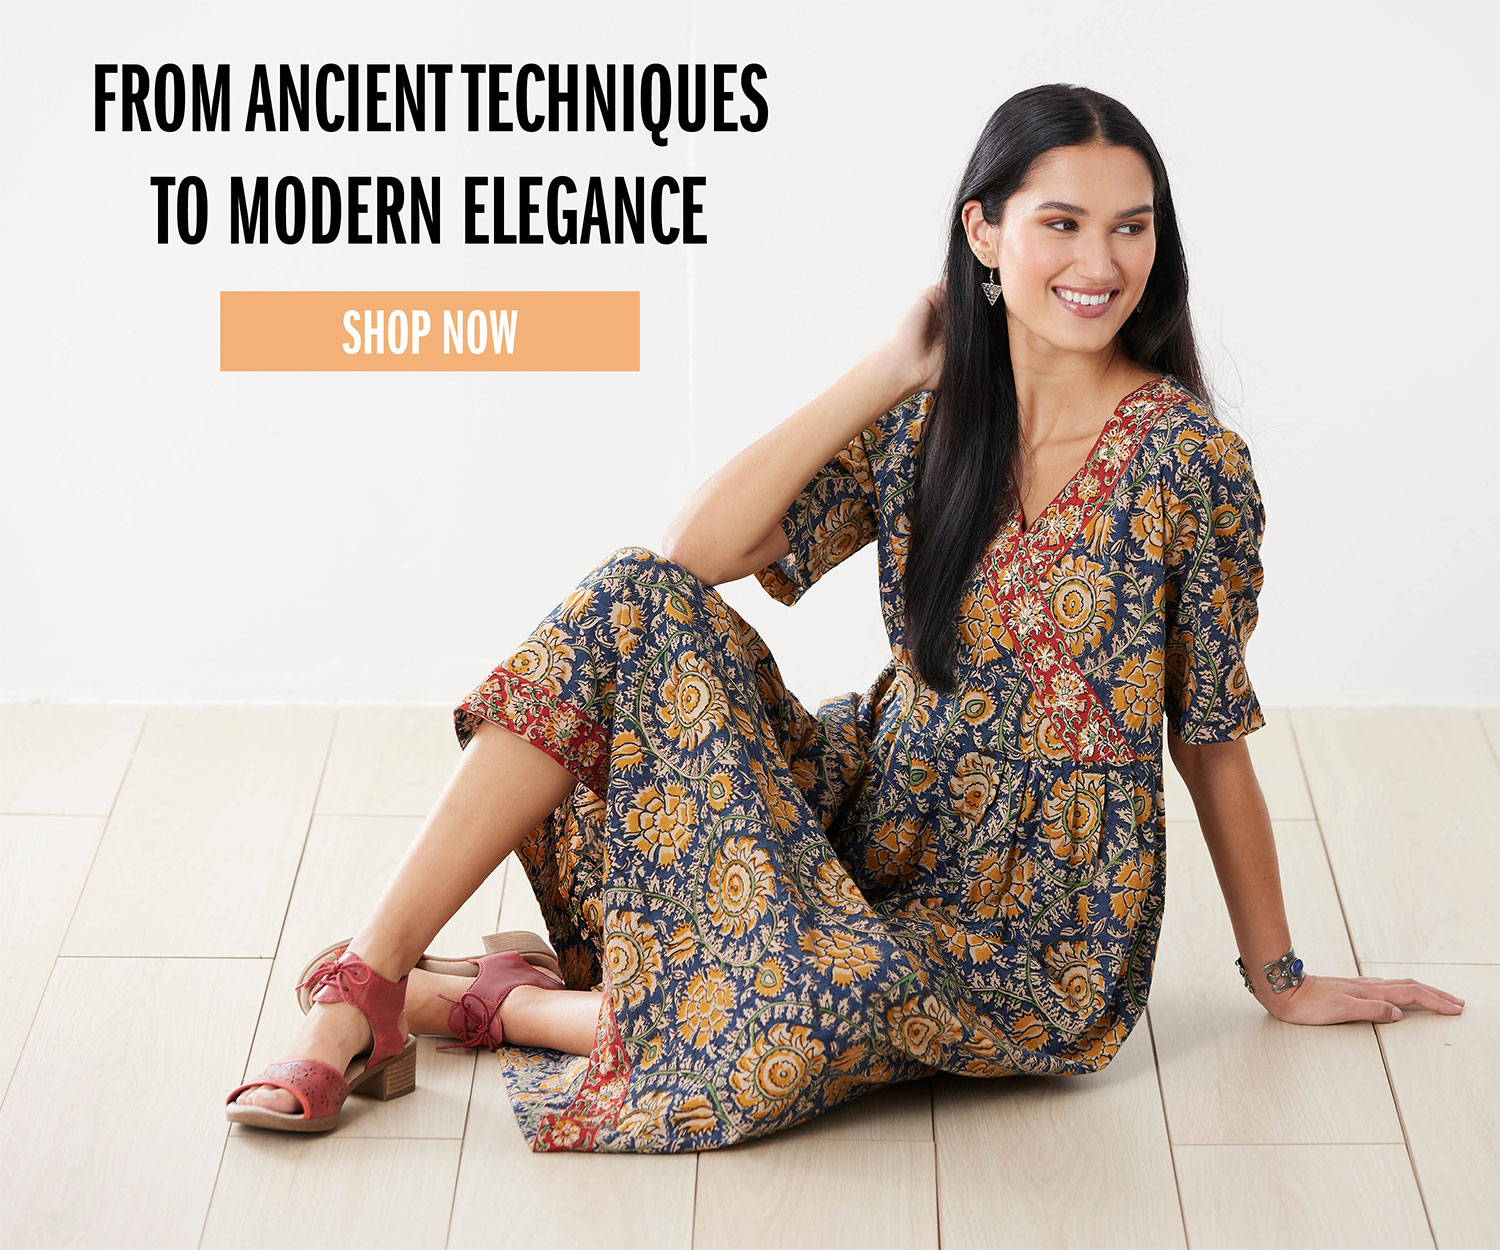 FROM ANCIENT TECHNIQUES TO MODERN ELEGANCE SHOP NOW